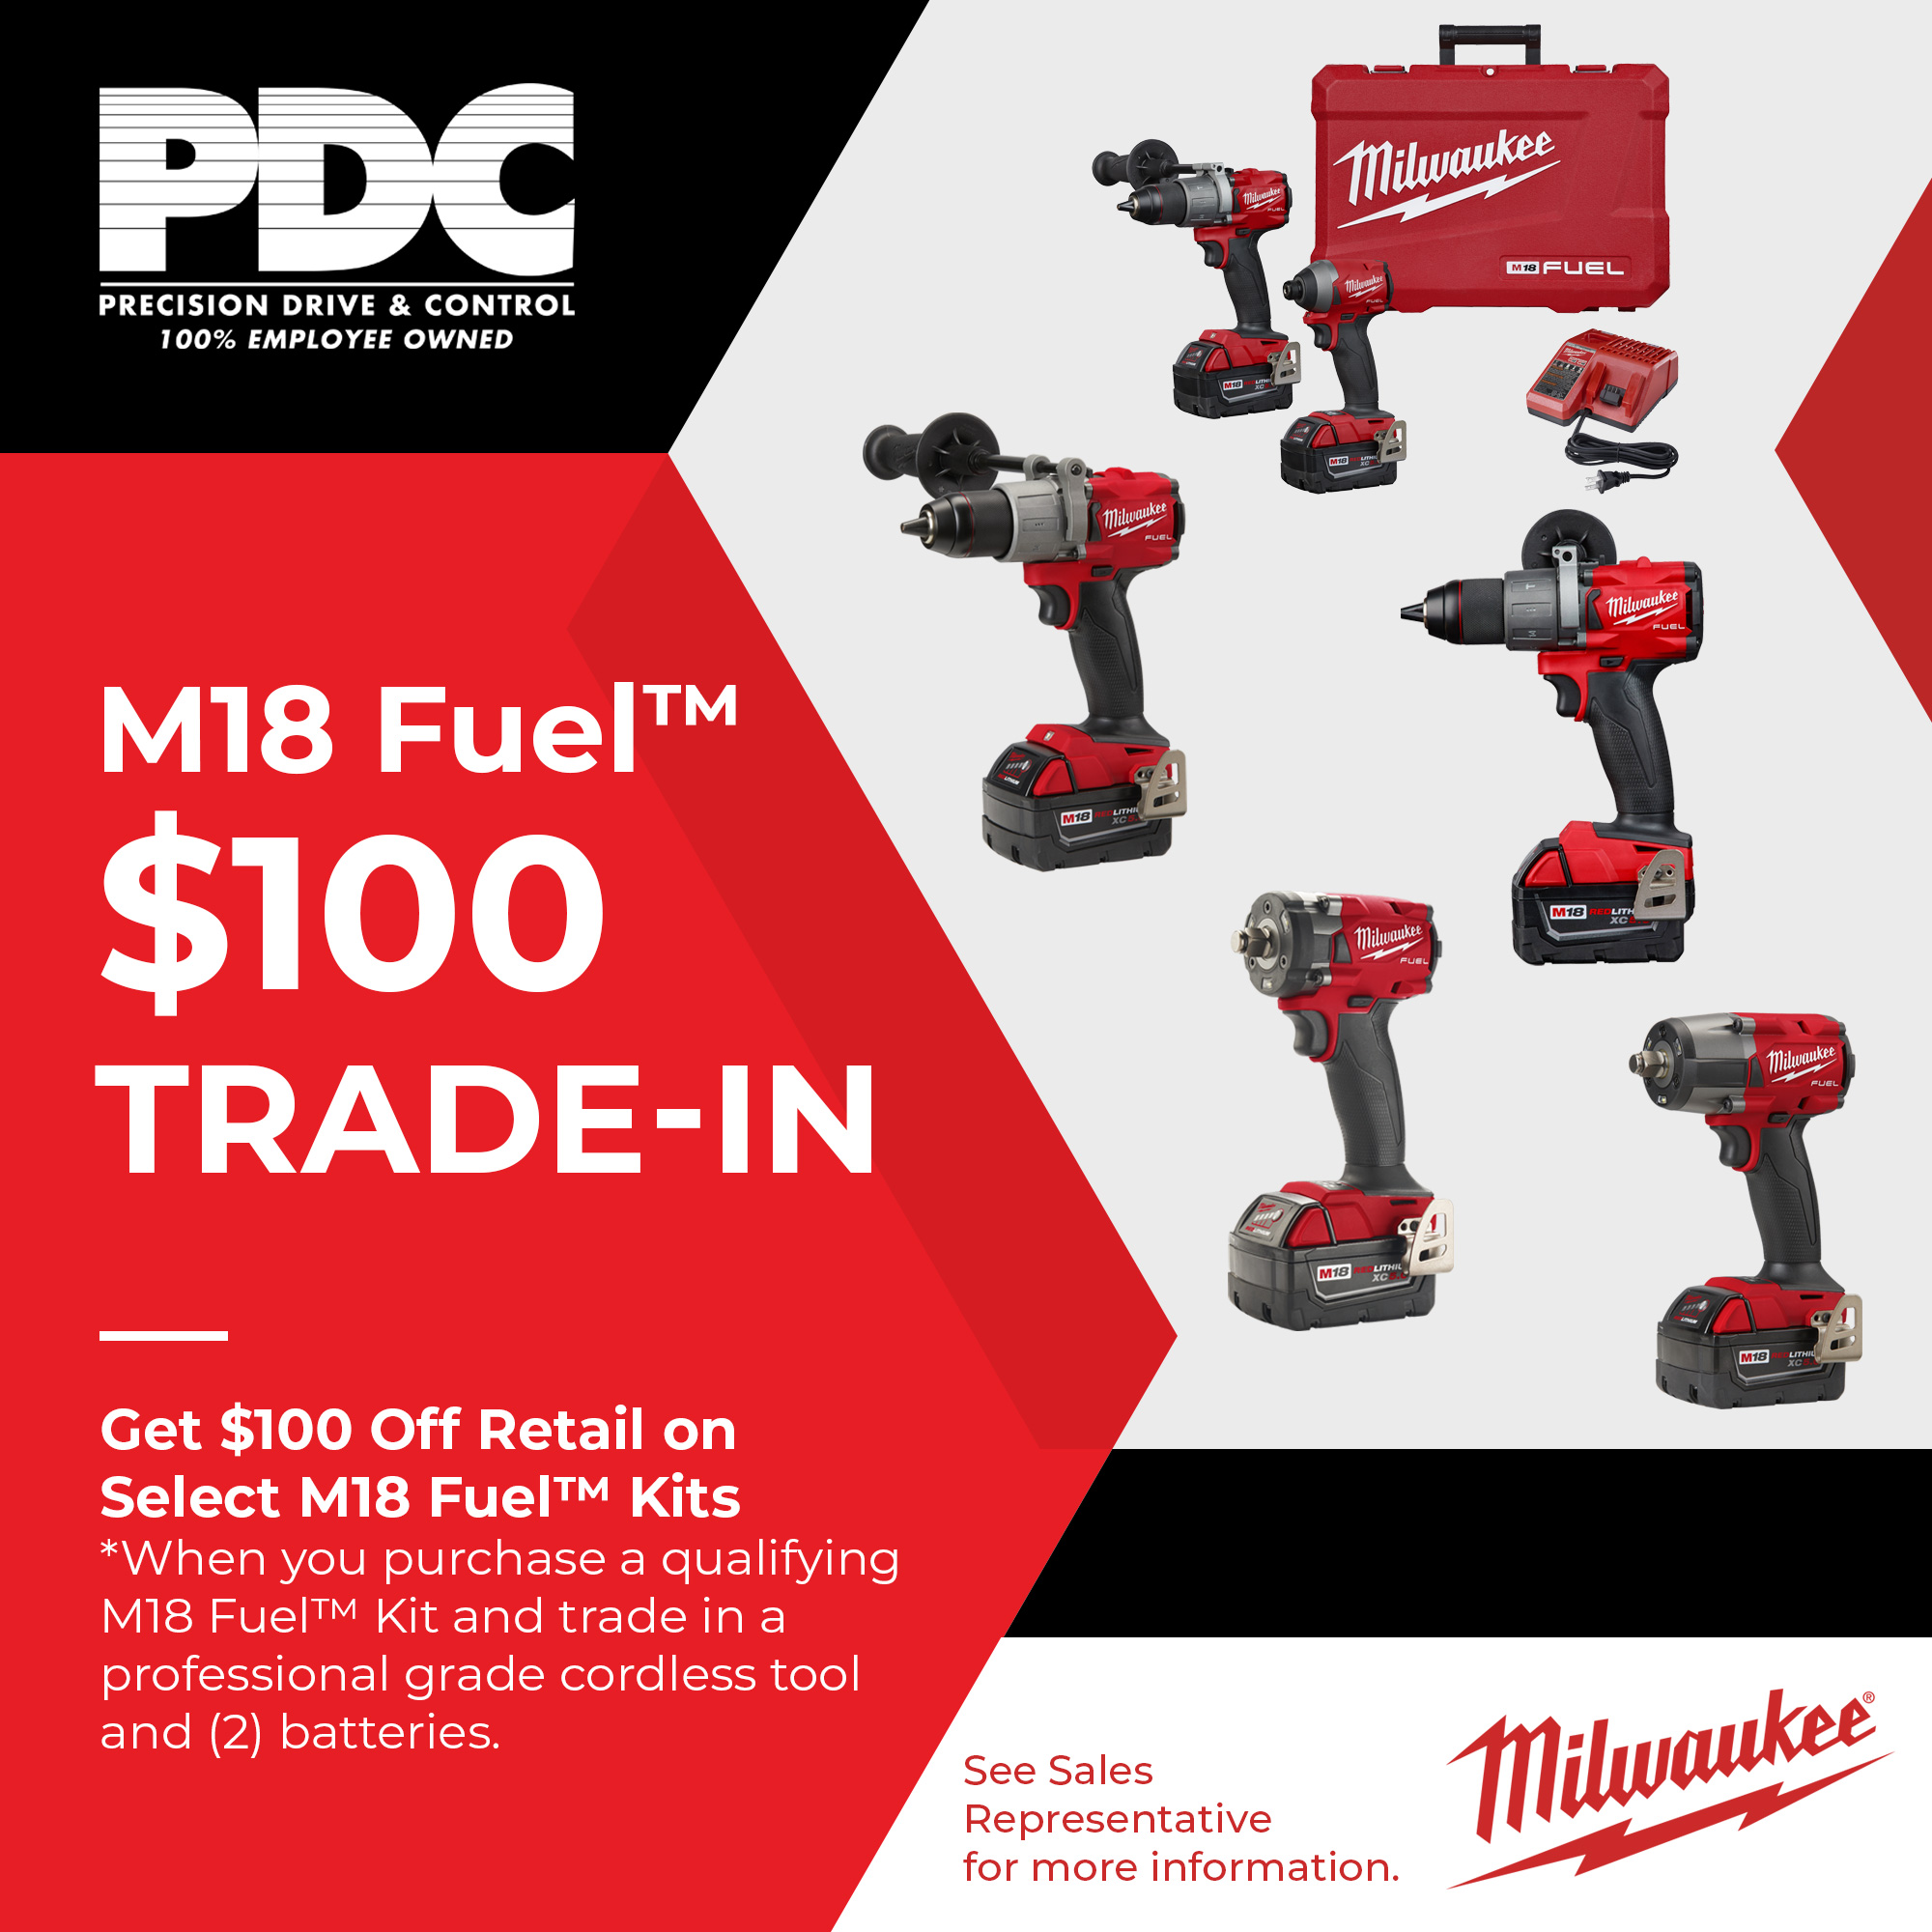 Milwaukee M18 Fuel Trade-In